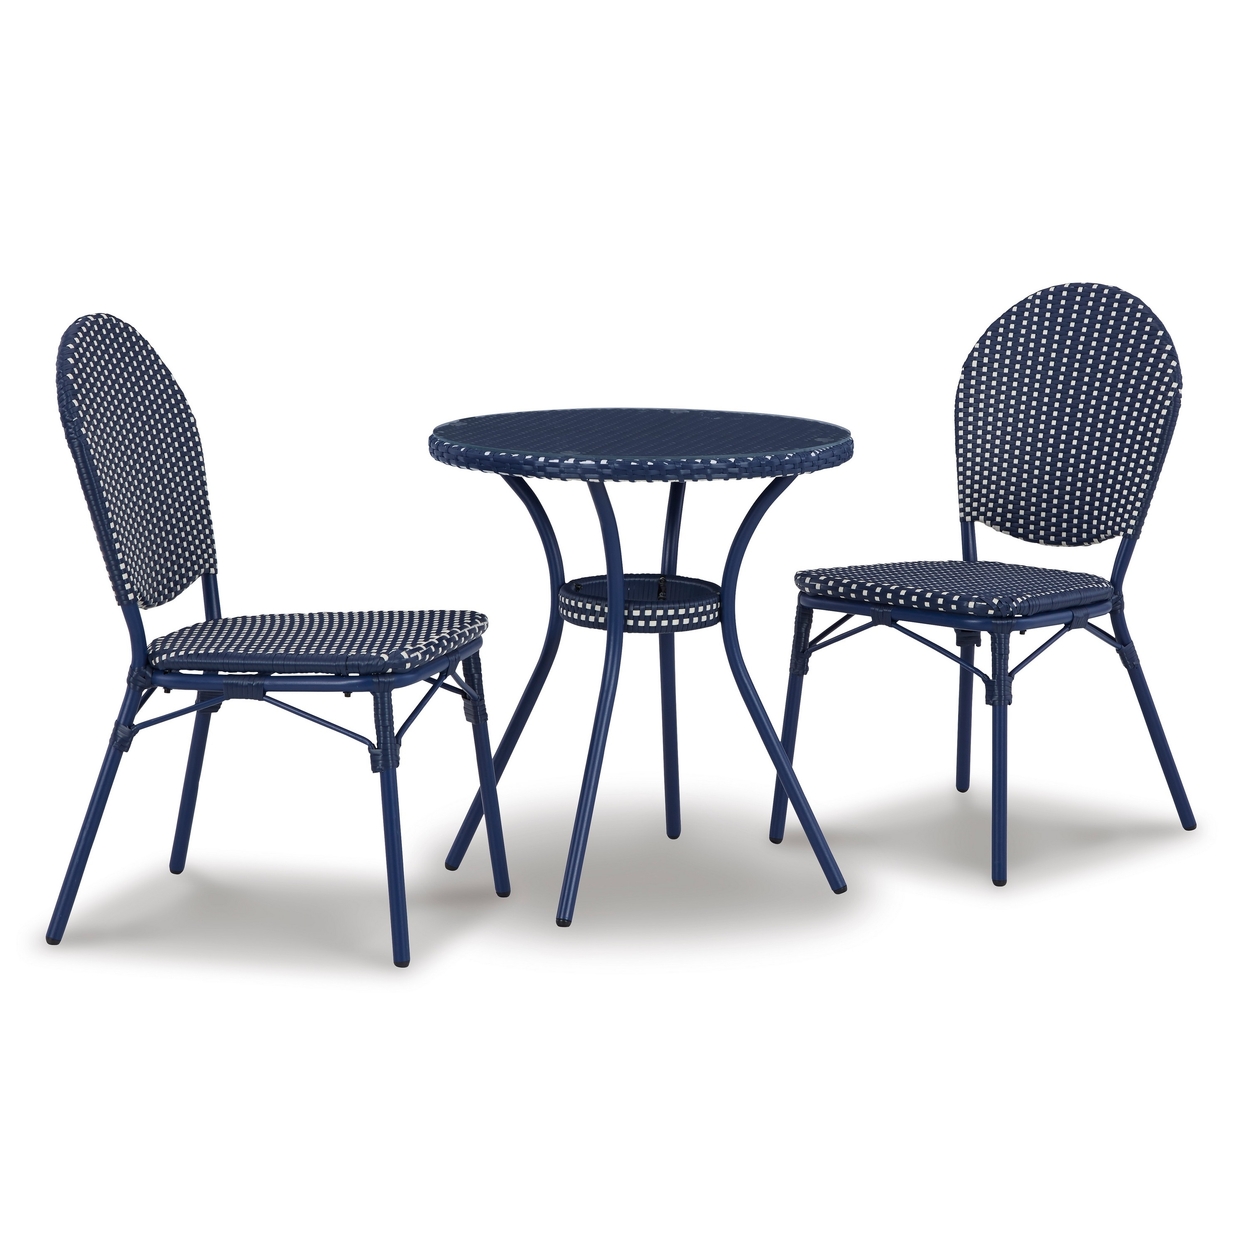 3 Piece Outdoor Table And 2 Chairs Bistro Set, Handwoven Blue Wicker- Saltoro Sherpi